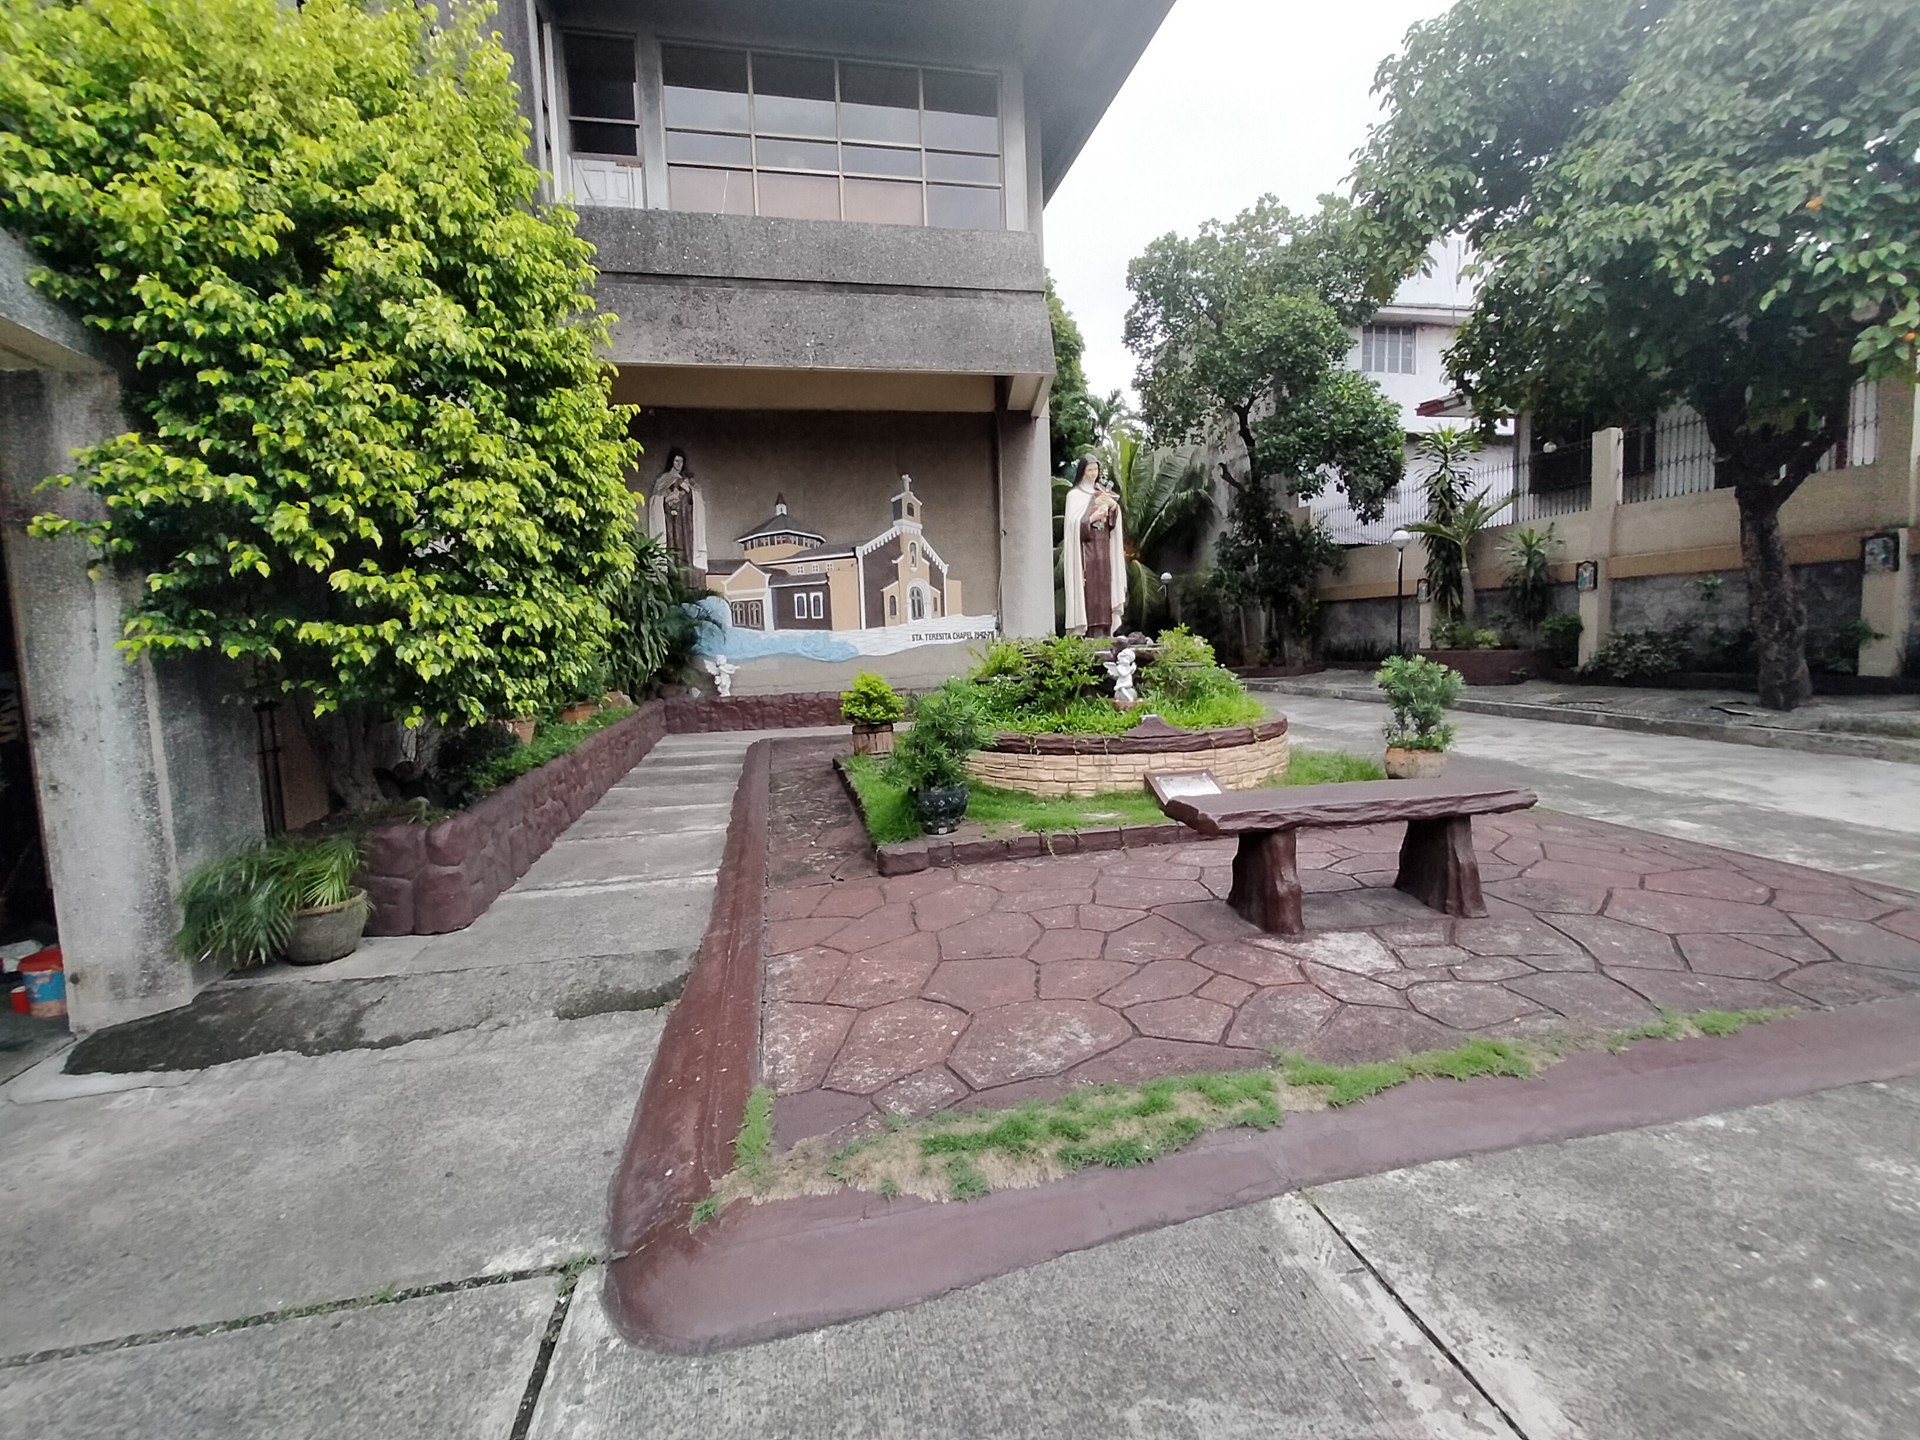 Photo of a garden at a church using ultra wide angle camera of the Oppo A92